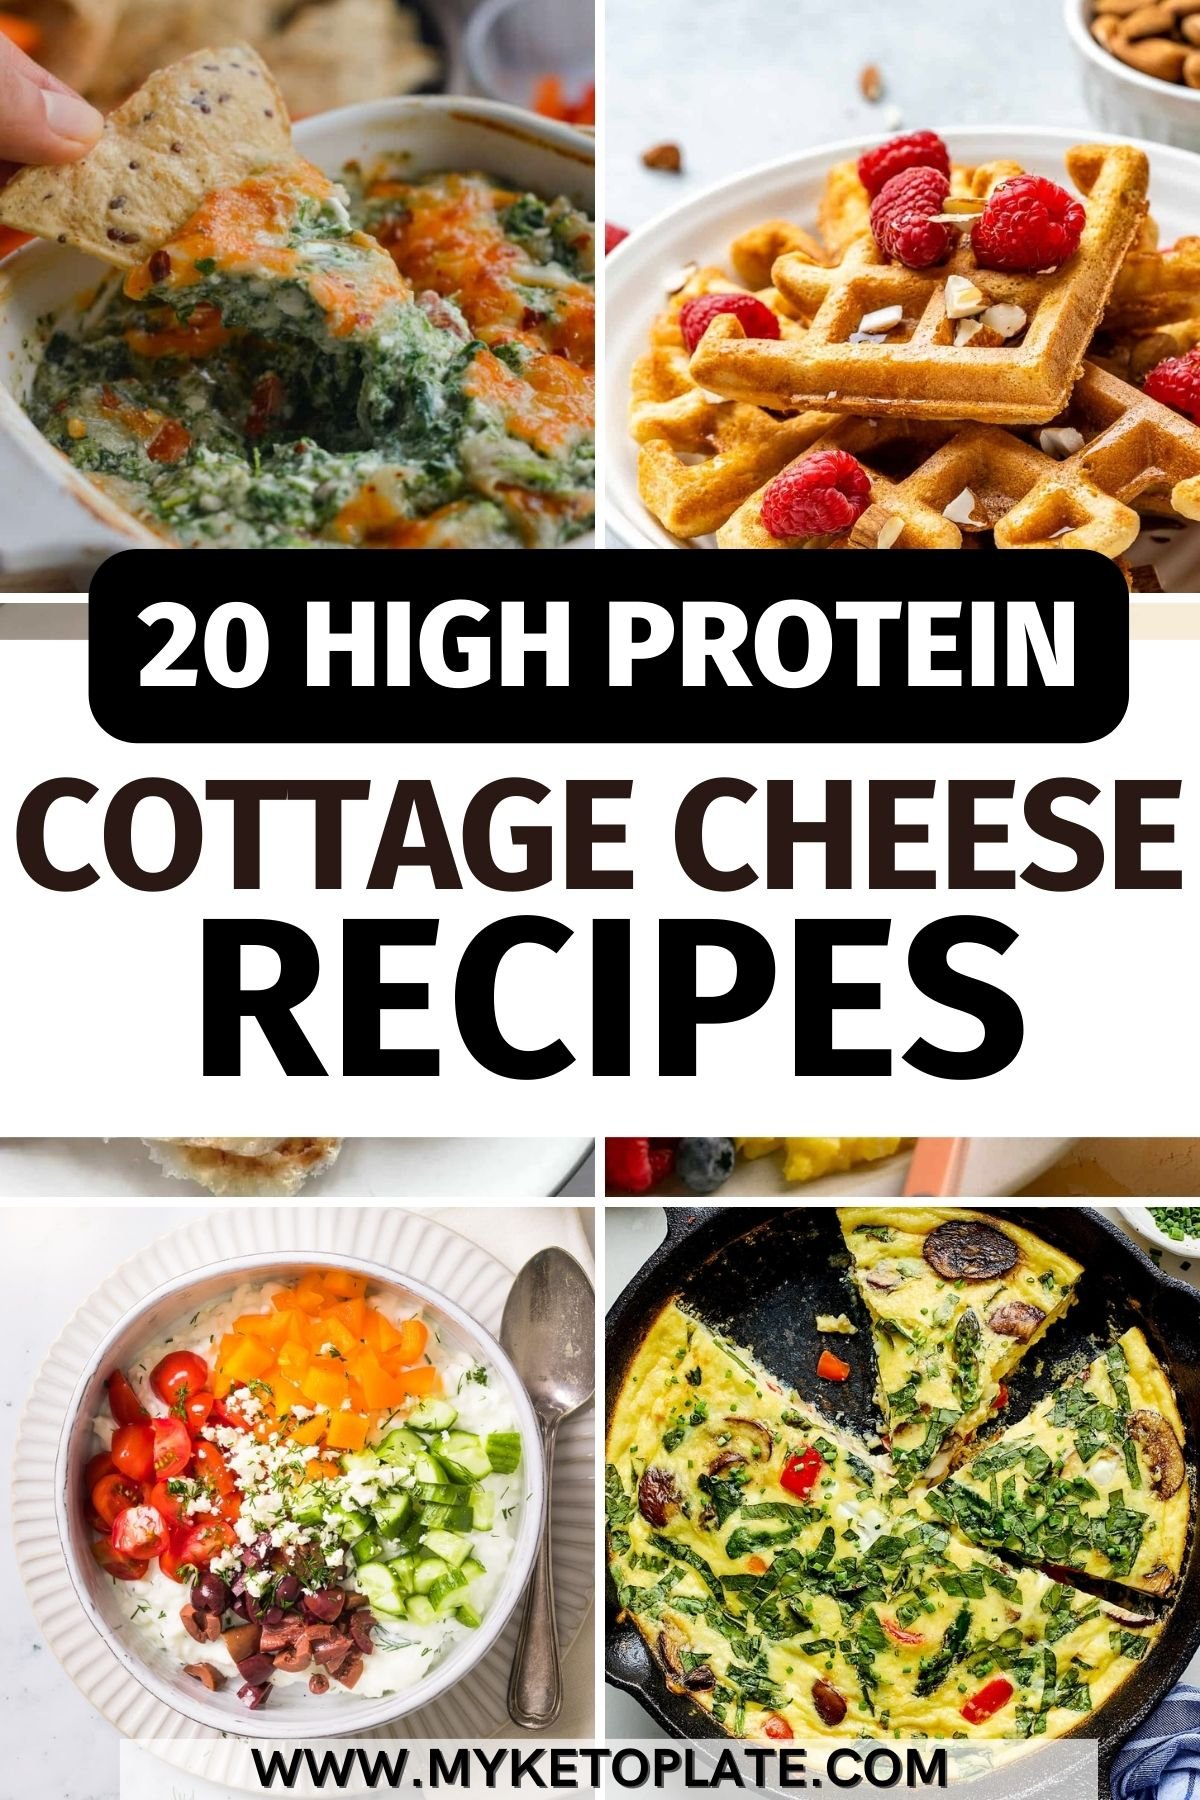 20 High Protein Cottage Cheese Recipes